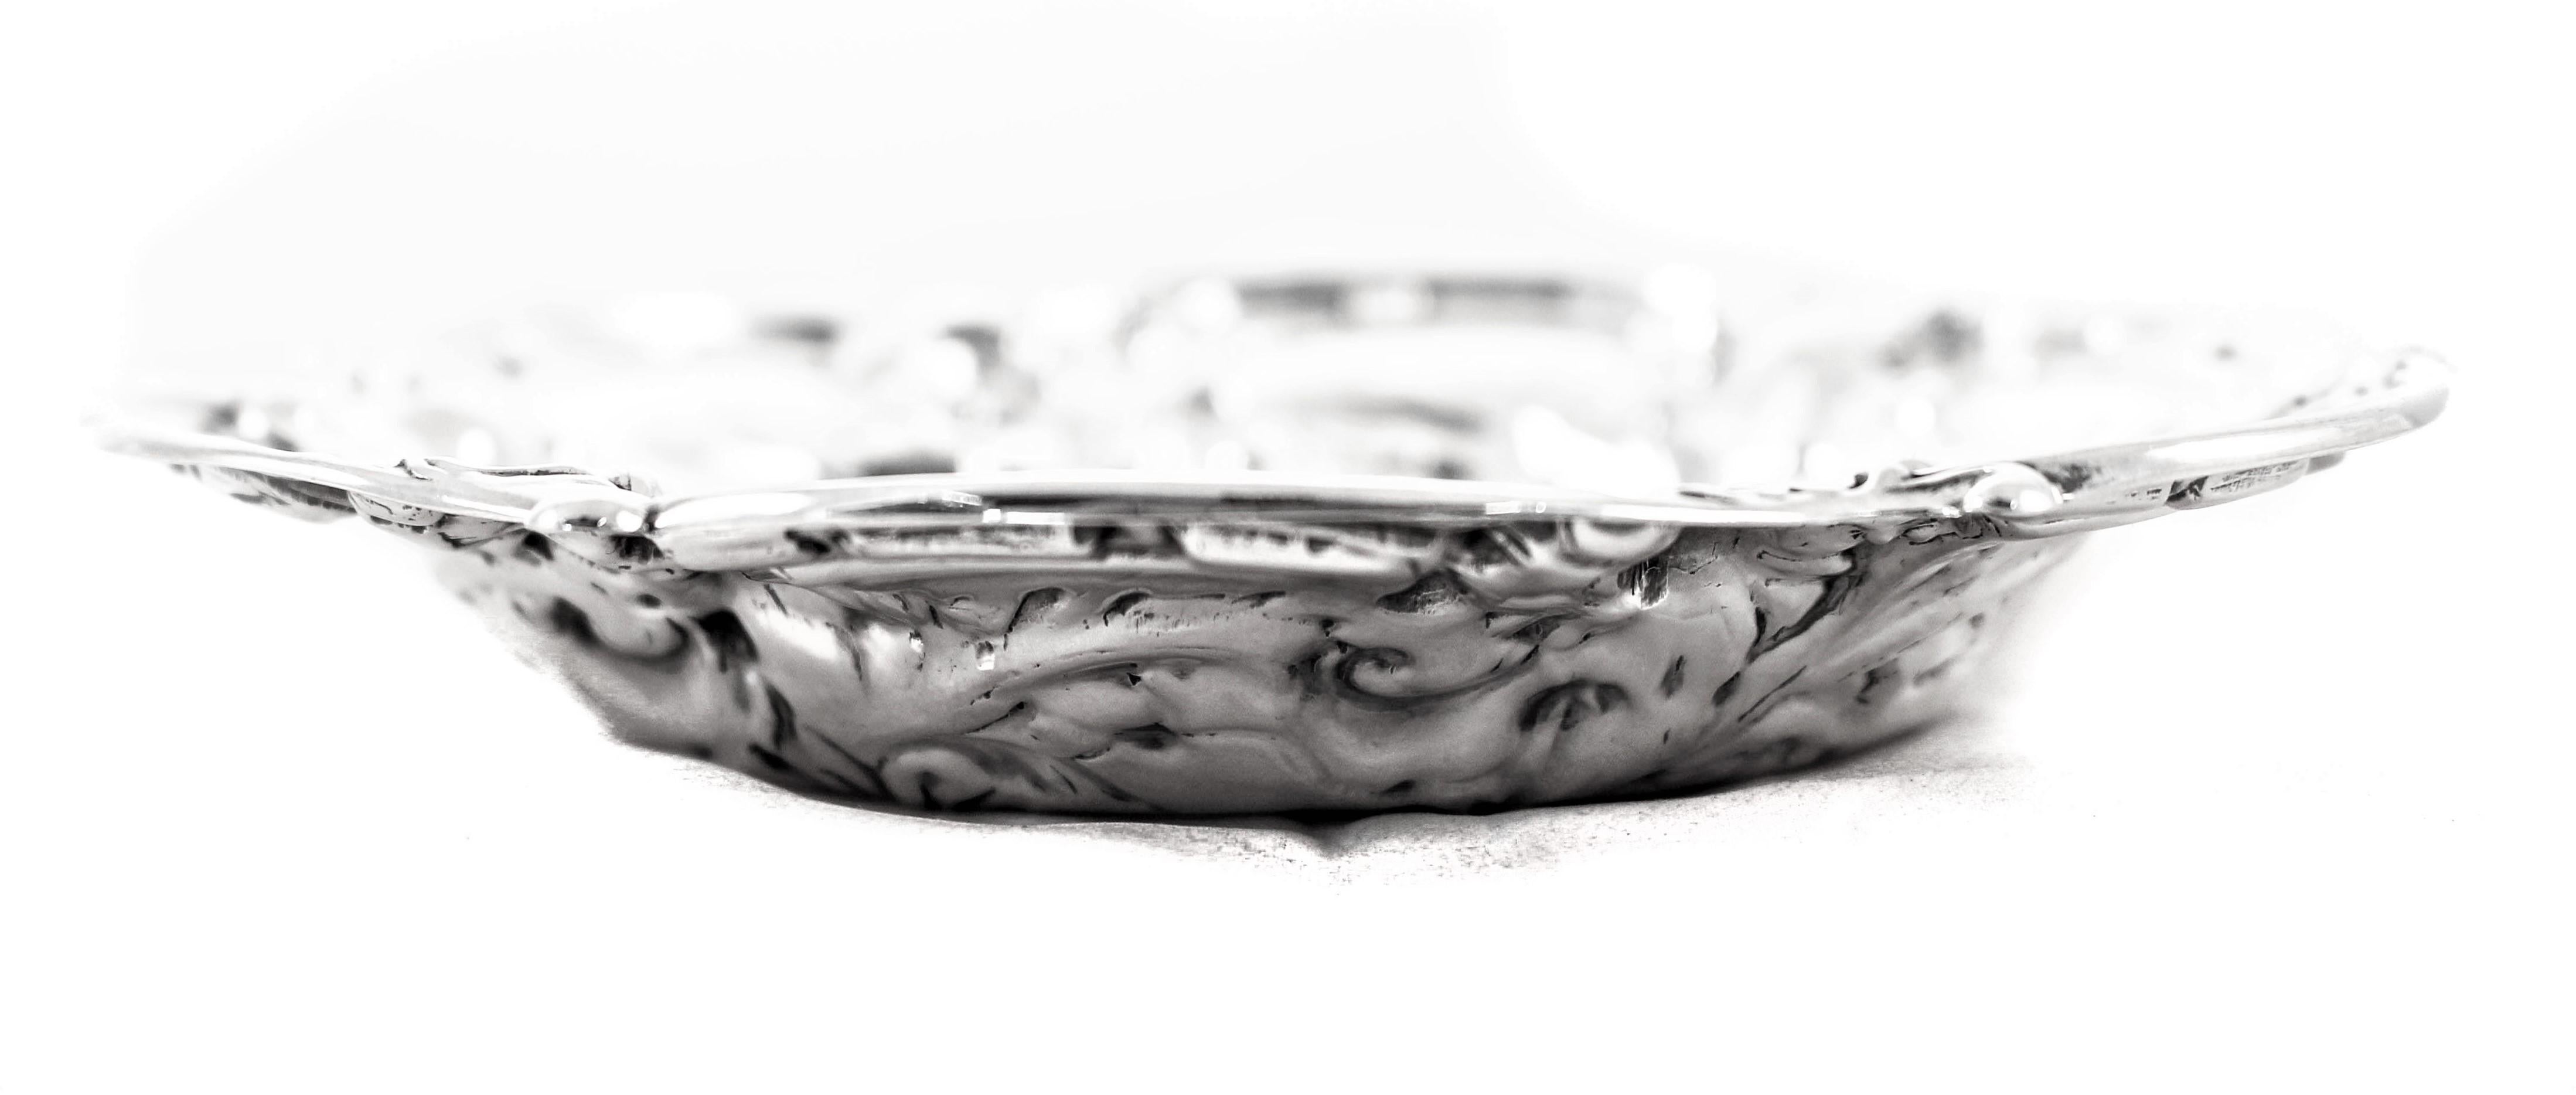 A fabulous piece of estate sterling silver from 1948. It has a scalloped edge with blown-out flowers and is in the Art Nouveau style. Inspired by natural forms particularly the curved lines of plants and flowers, the Art Nouveau movement looked to